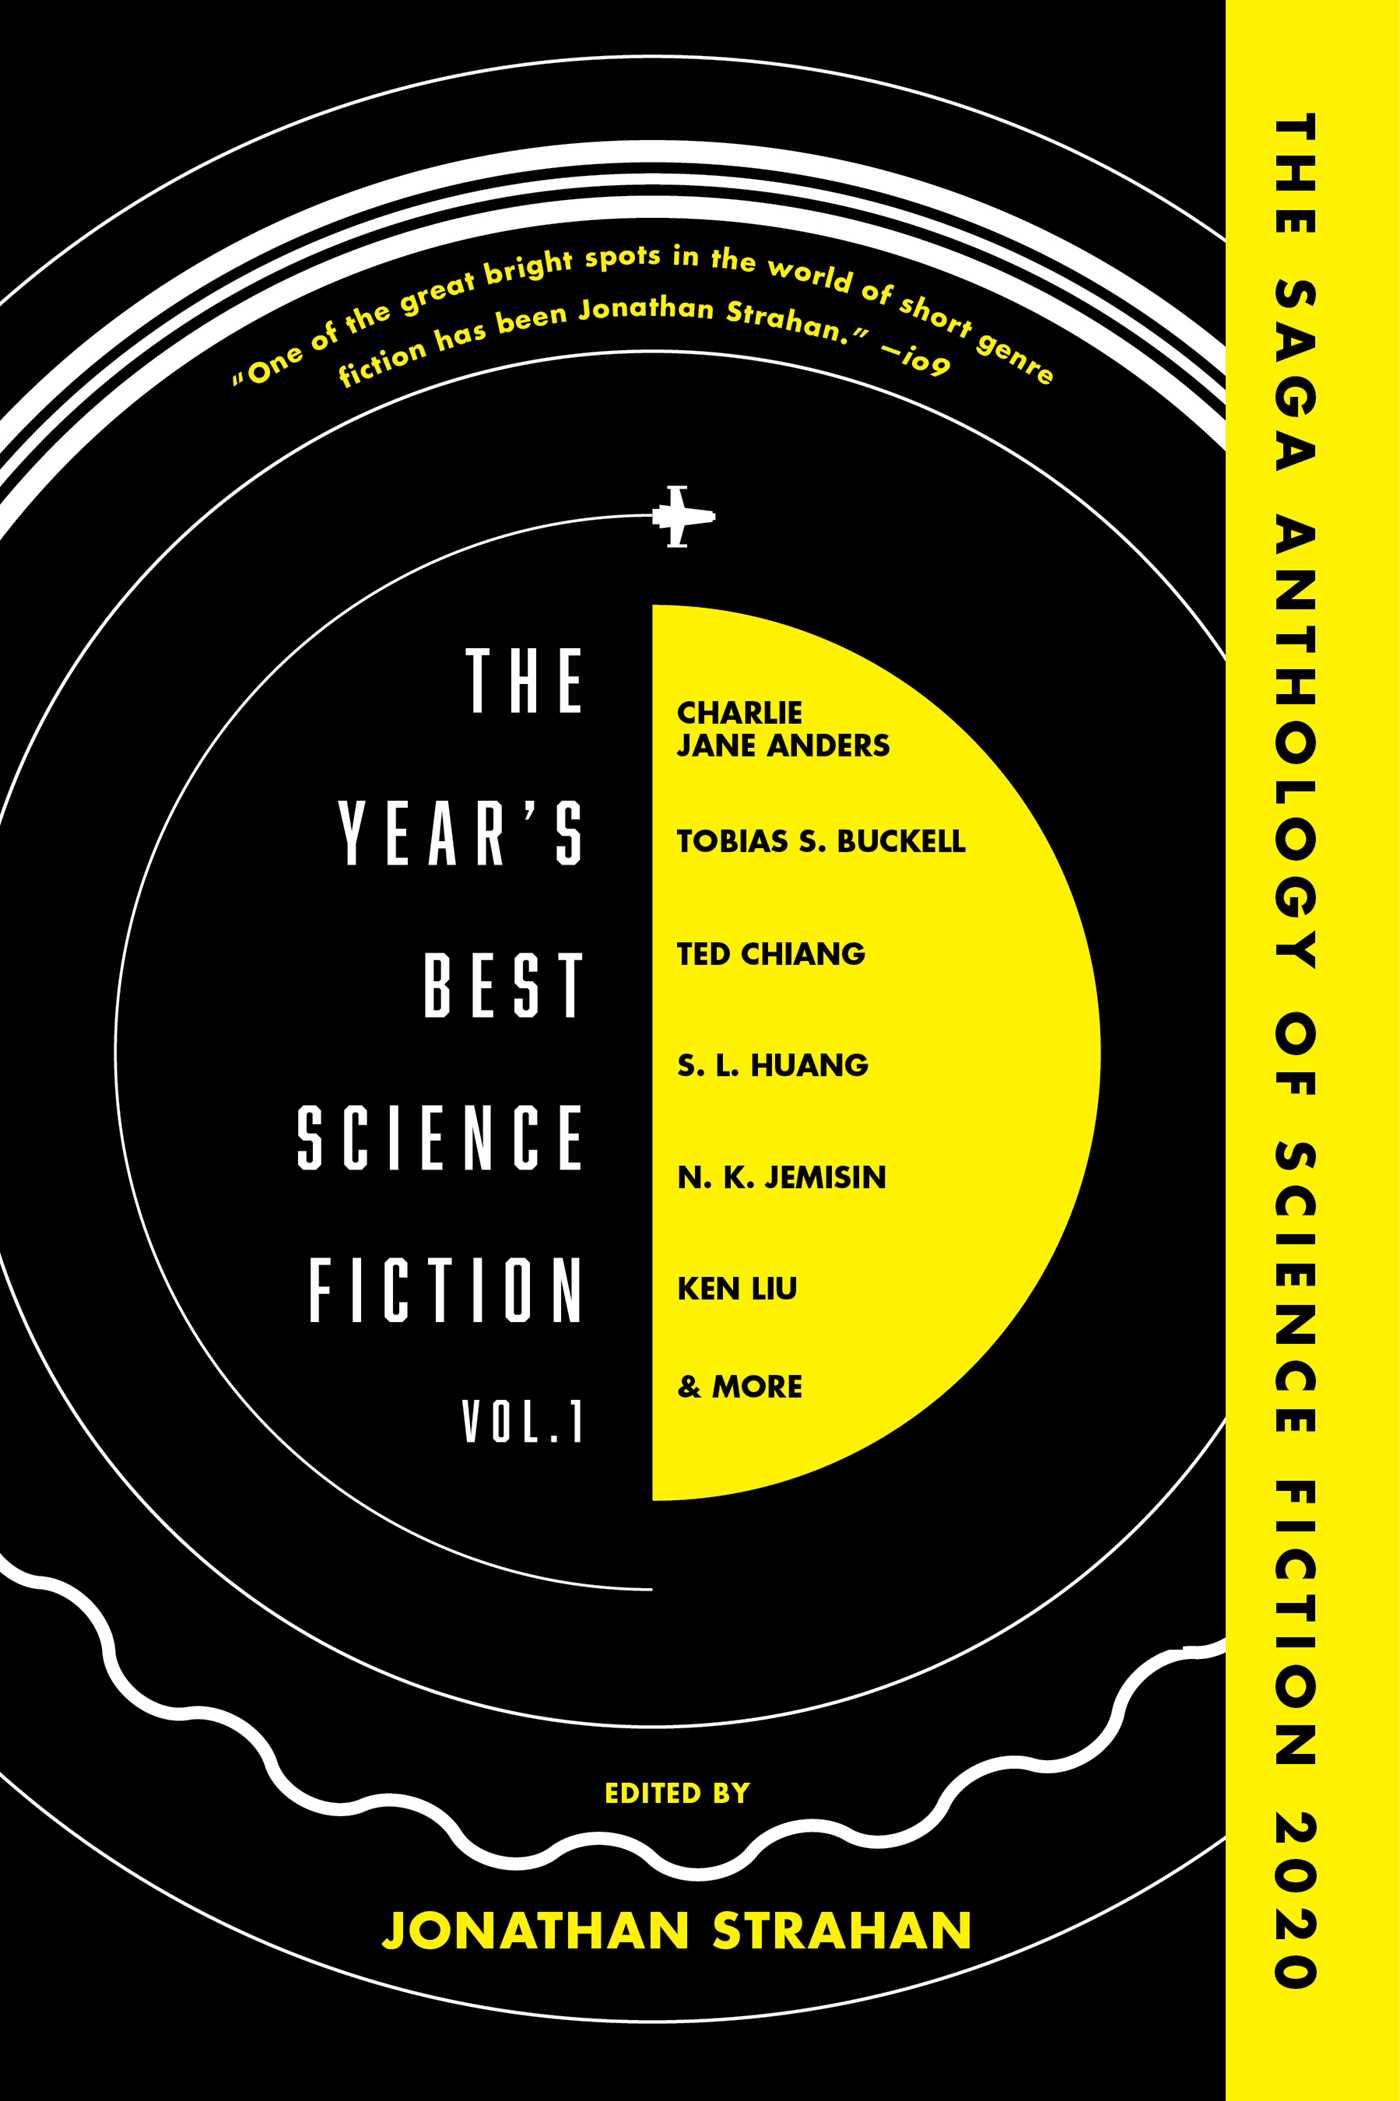 The Year's Best Science Fiction by Jonathan Strahan